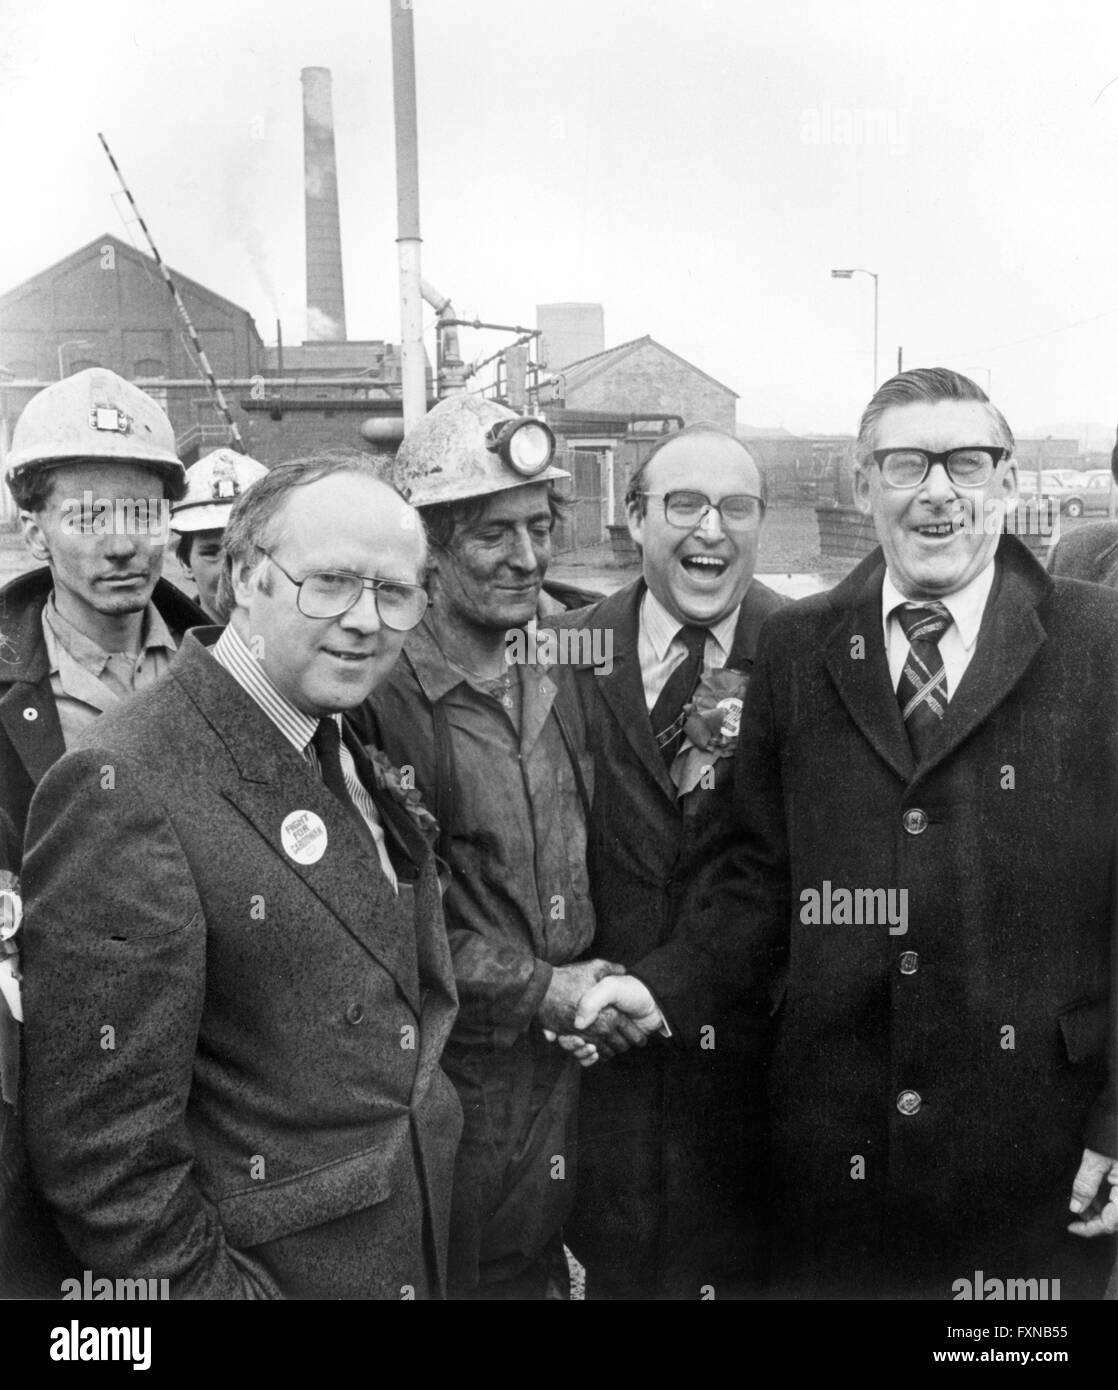 Labour MP John Smith mp with Scottish miners leader mick mcgahey at Bilston Glen colliery during the miners strike of 1984 Stock Photo